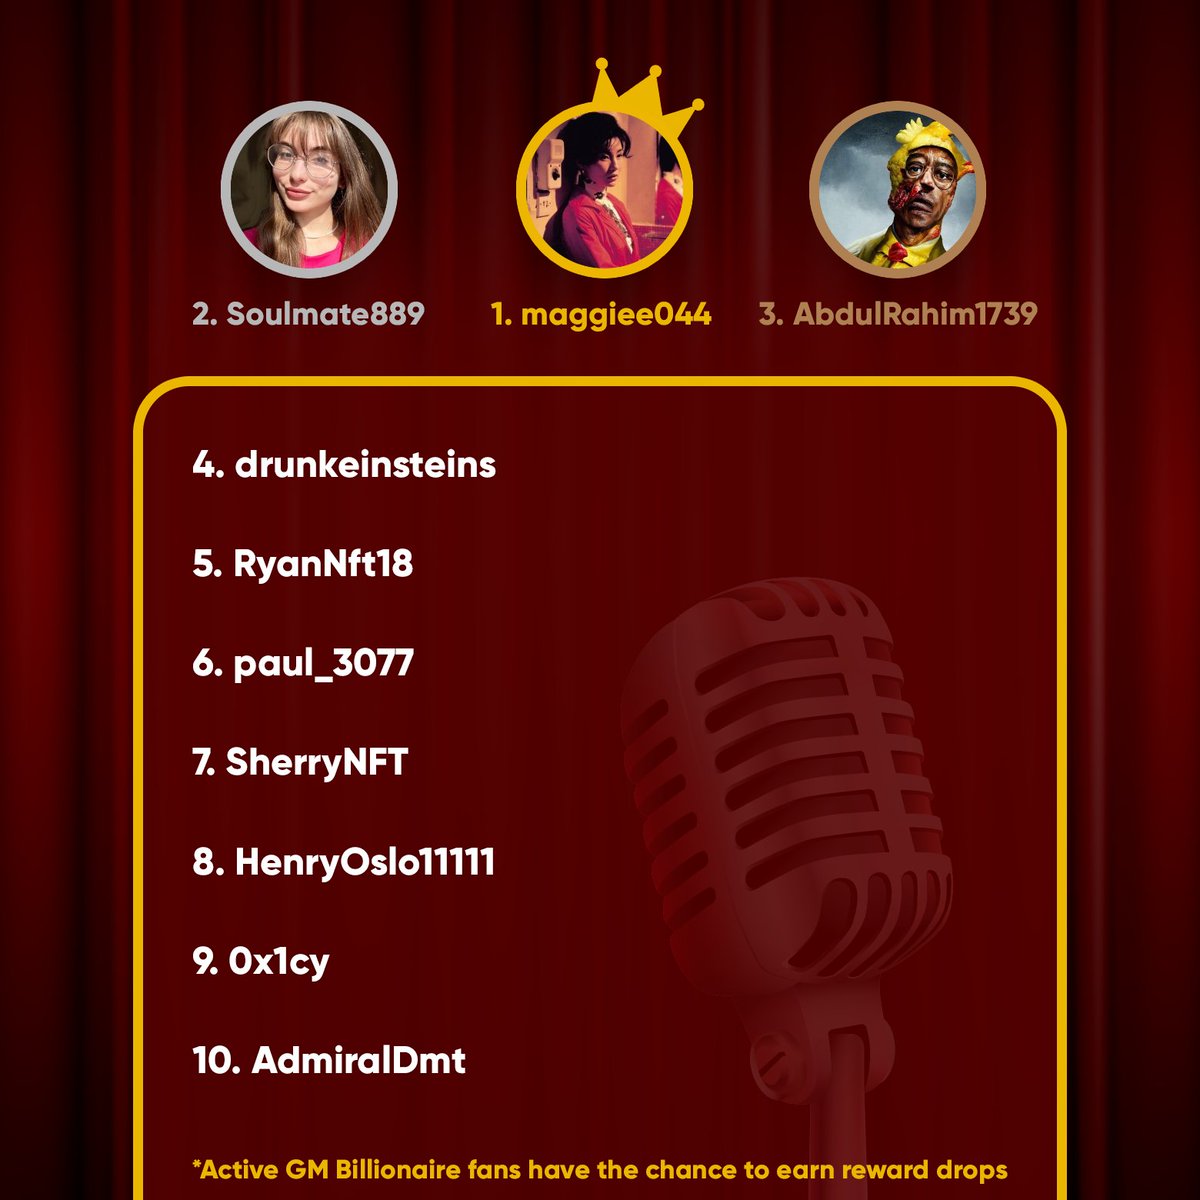 This was our latest activity leaderboard 👑 The leaderboard will be updated soon, engage & listen to the spaces to win! Congratz @maggiee044 for the prize! 💰